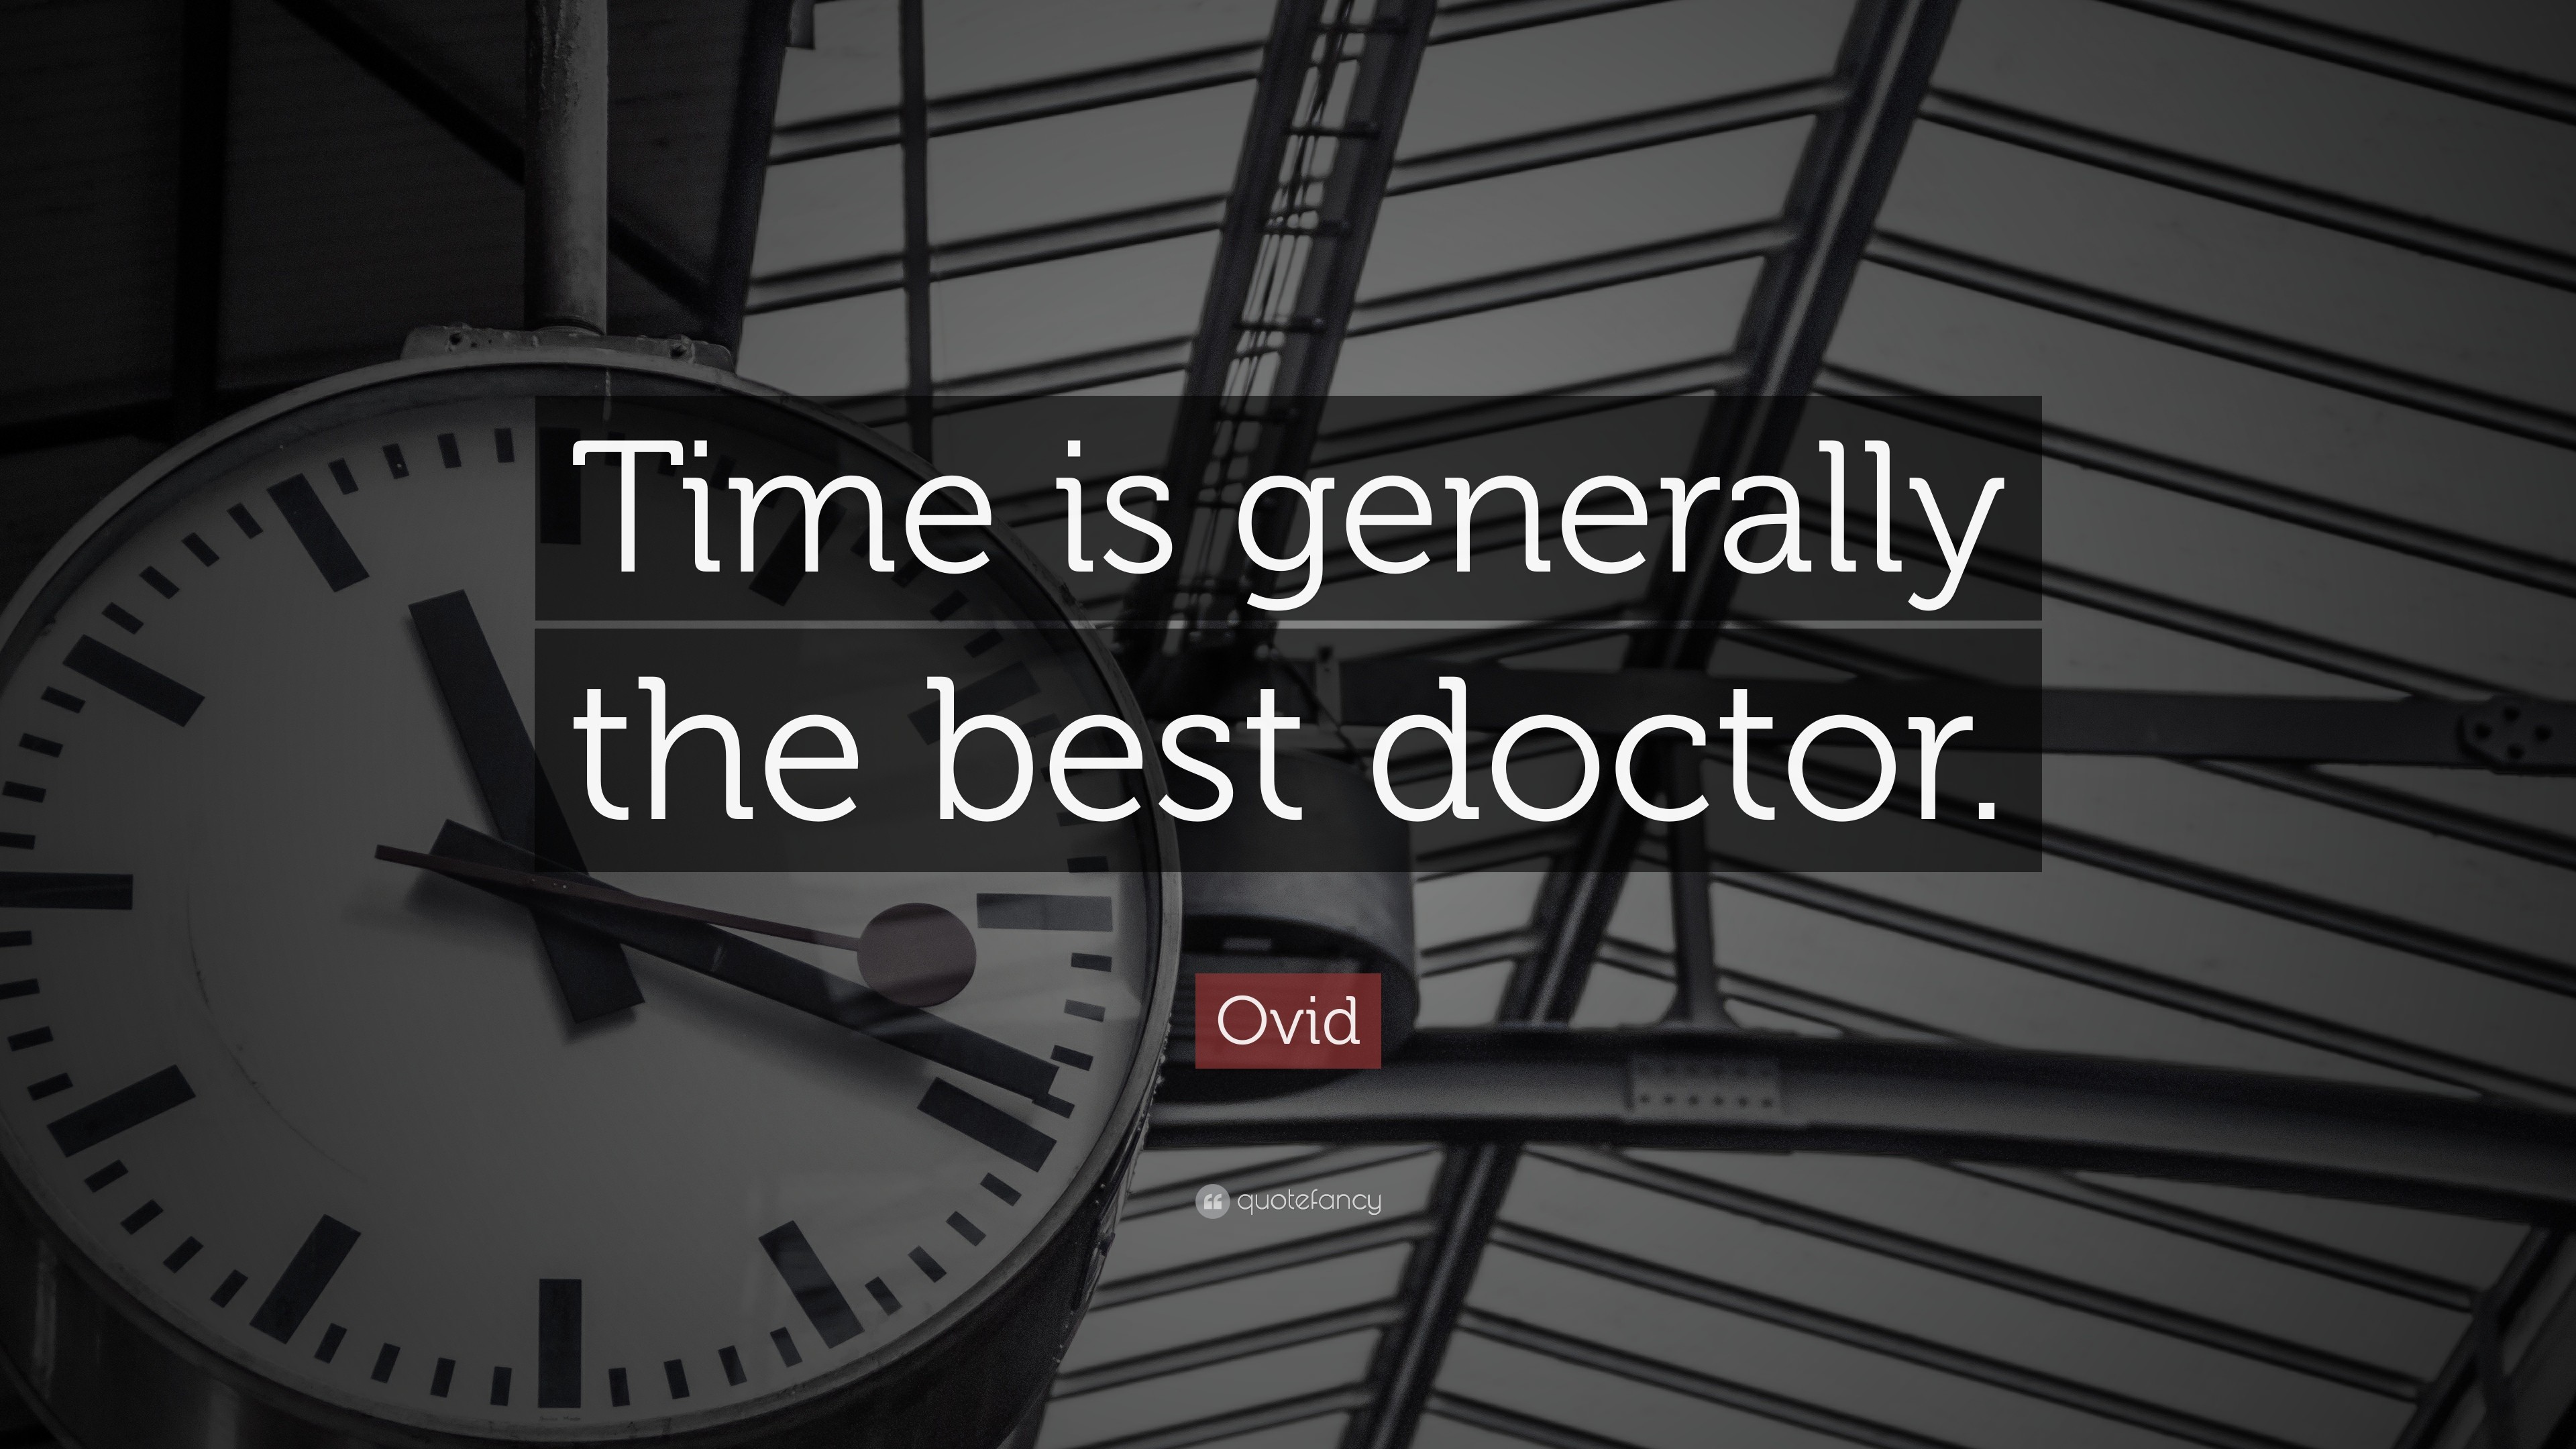 3840x2160 Ovid Quote: “Time is generally the best doctor.”